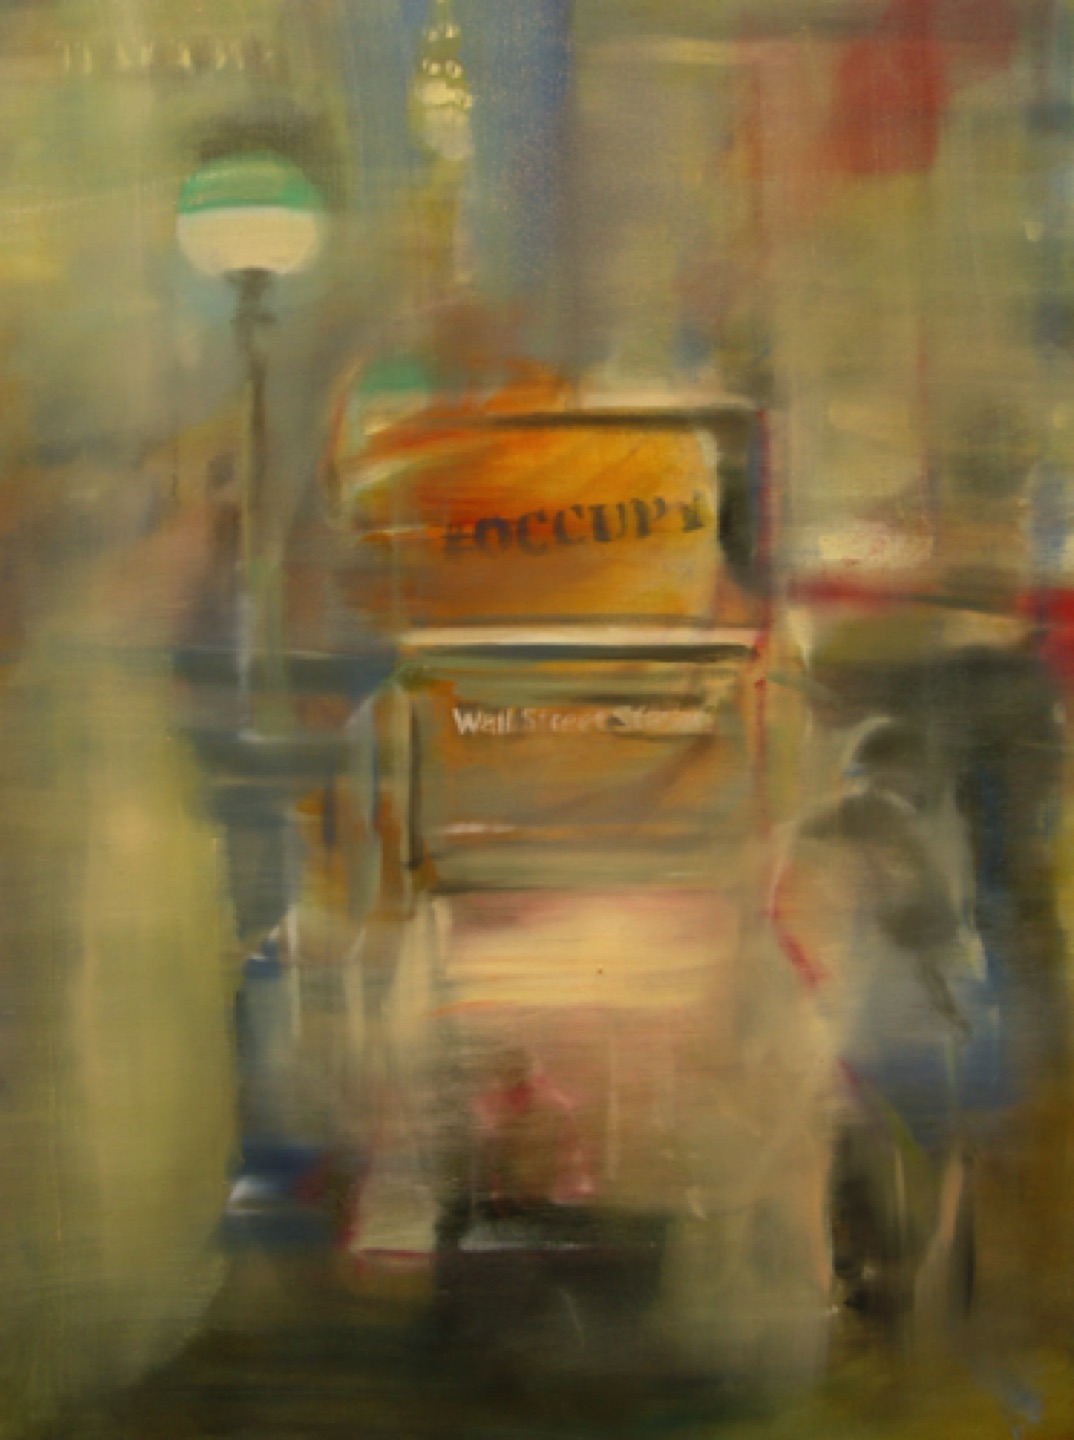 Gregg Chadwick
Occupy
40"x30" oil on linen 2012 
Angela Hudson Collection, Los Angeles, California